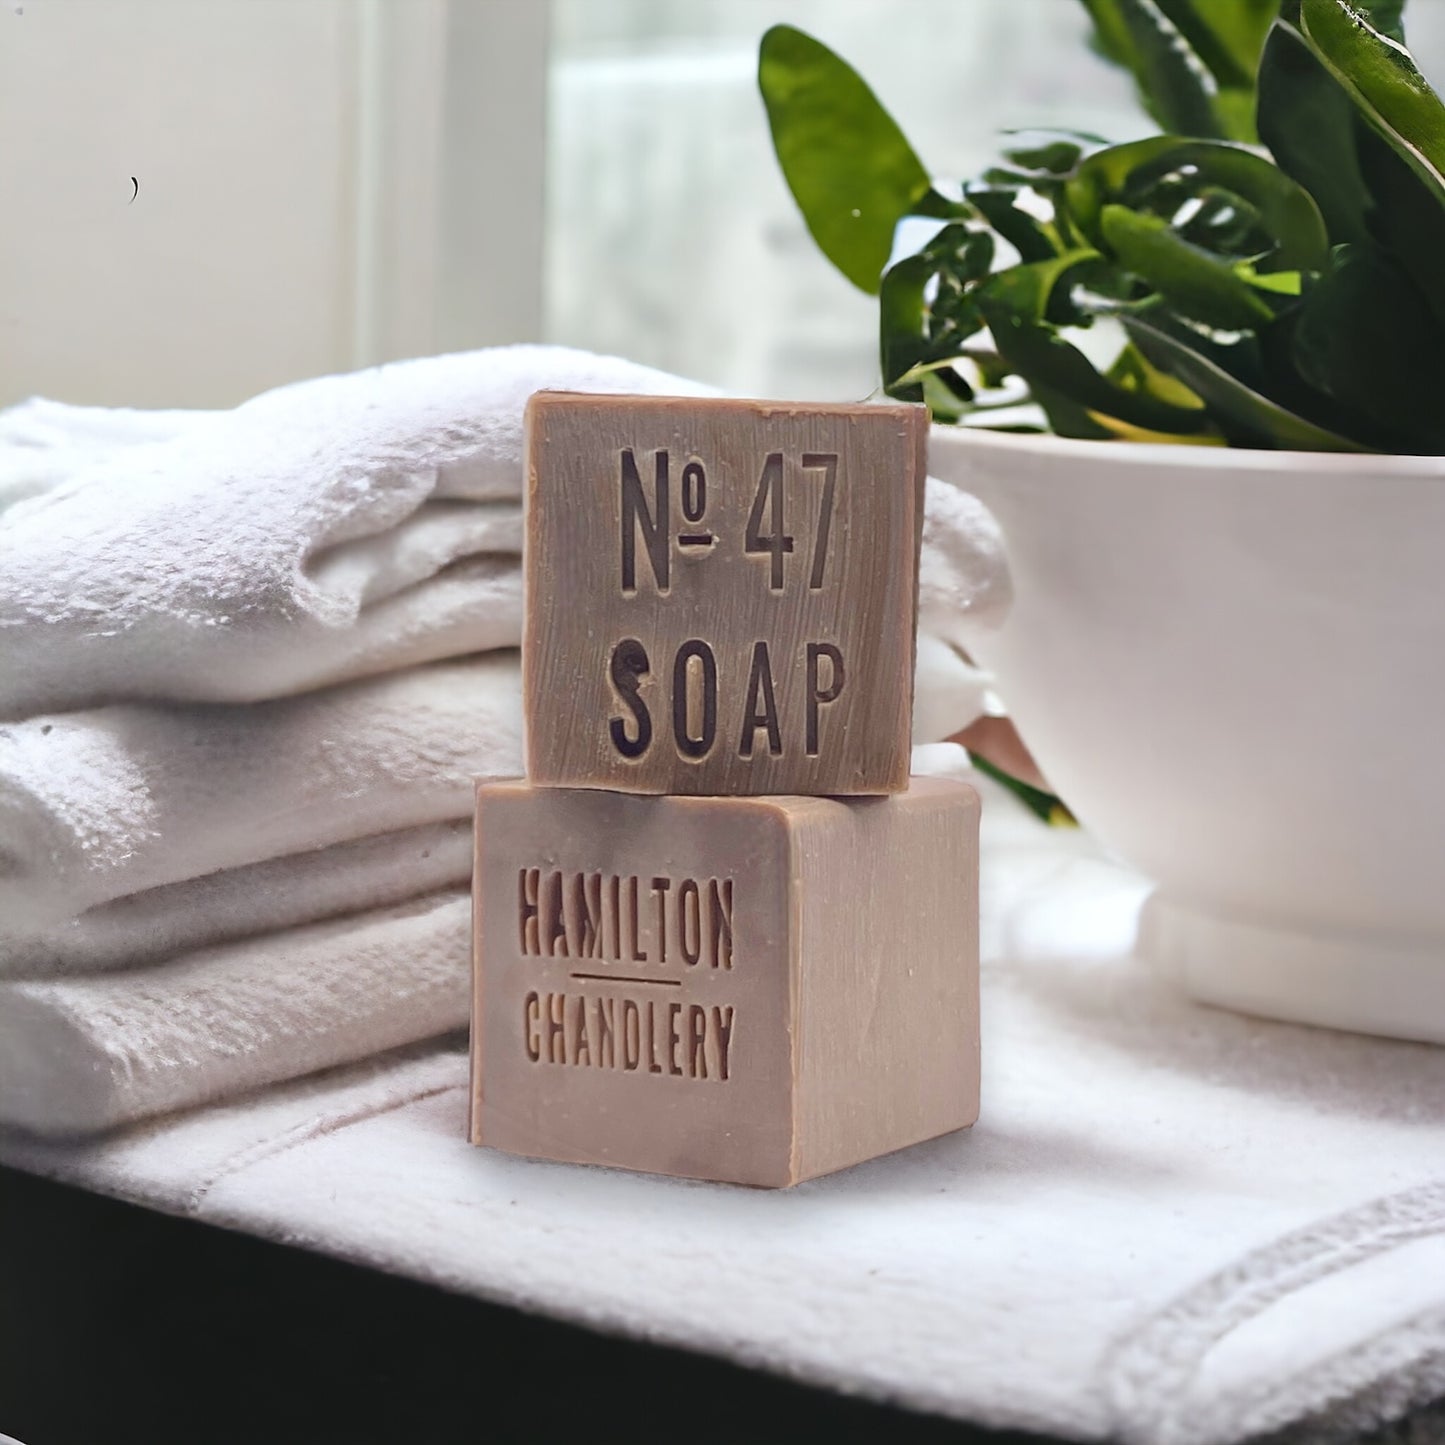 Fragrance No. 47 Sea Salt Soap with White Towels and Plant in Background | Hamilton Chandlery